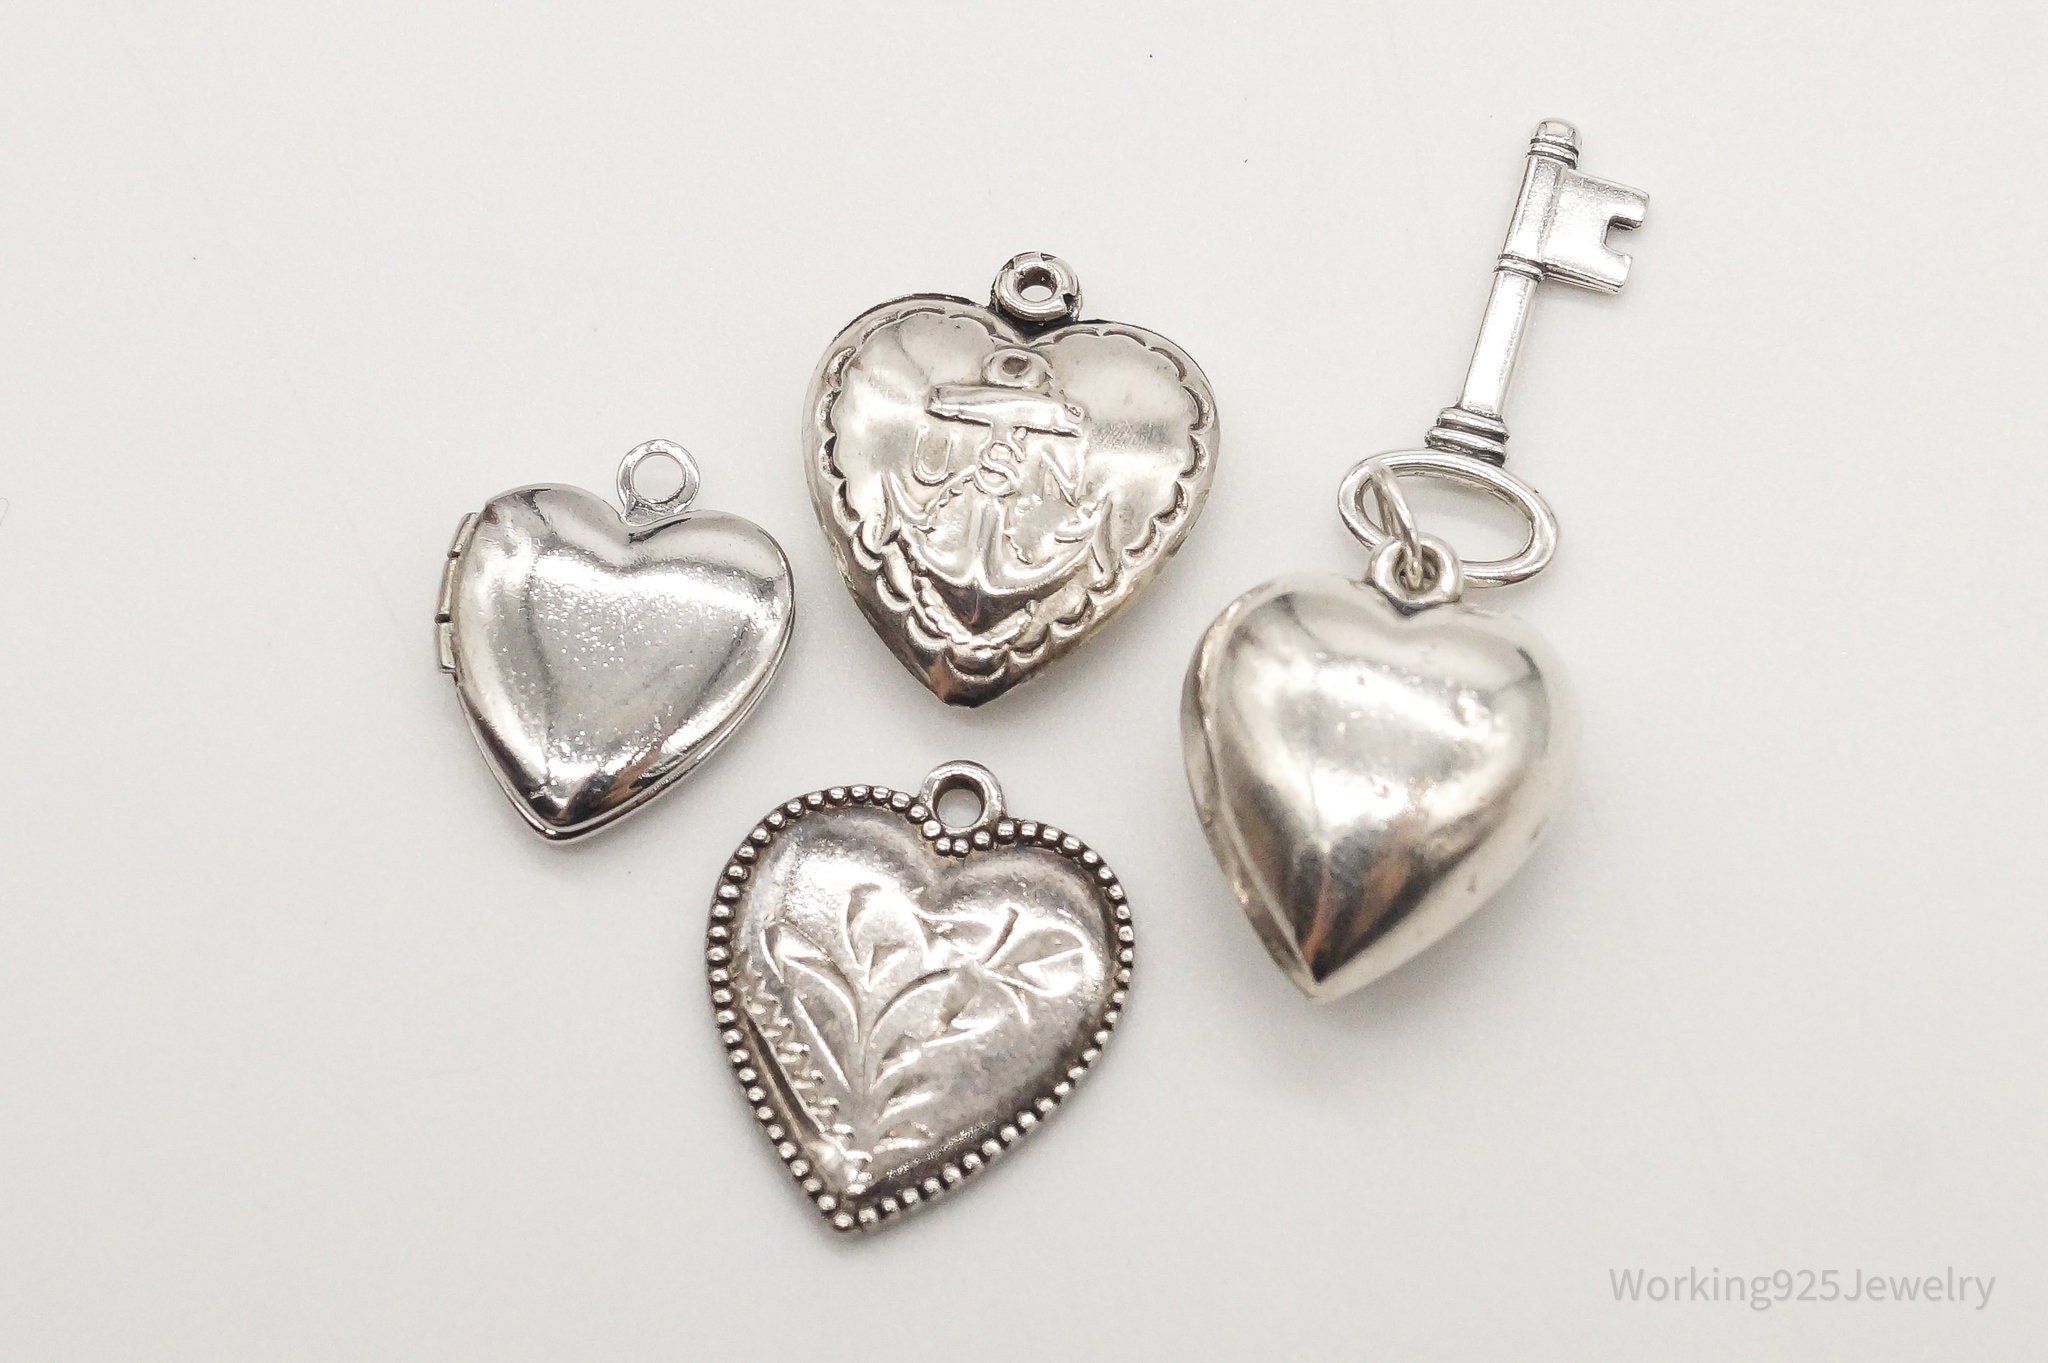 Antique Puffy Hearts Sterling Silver Charms Set Lot